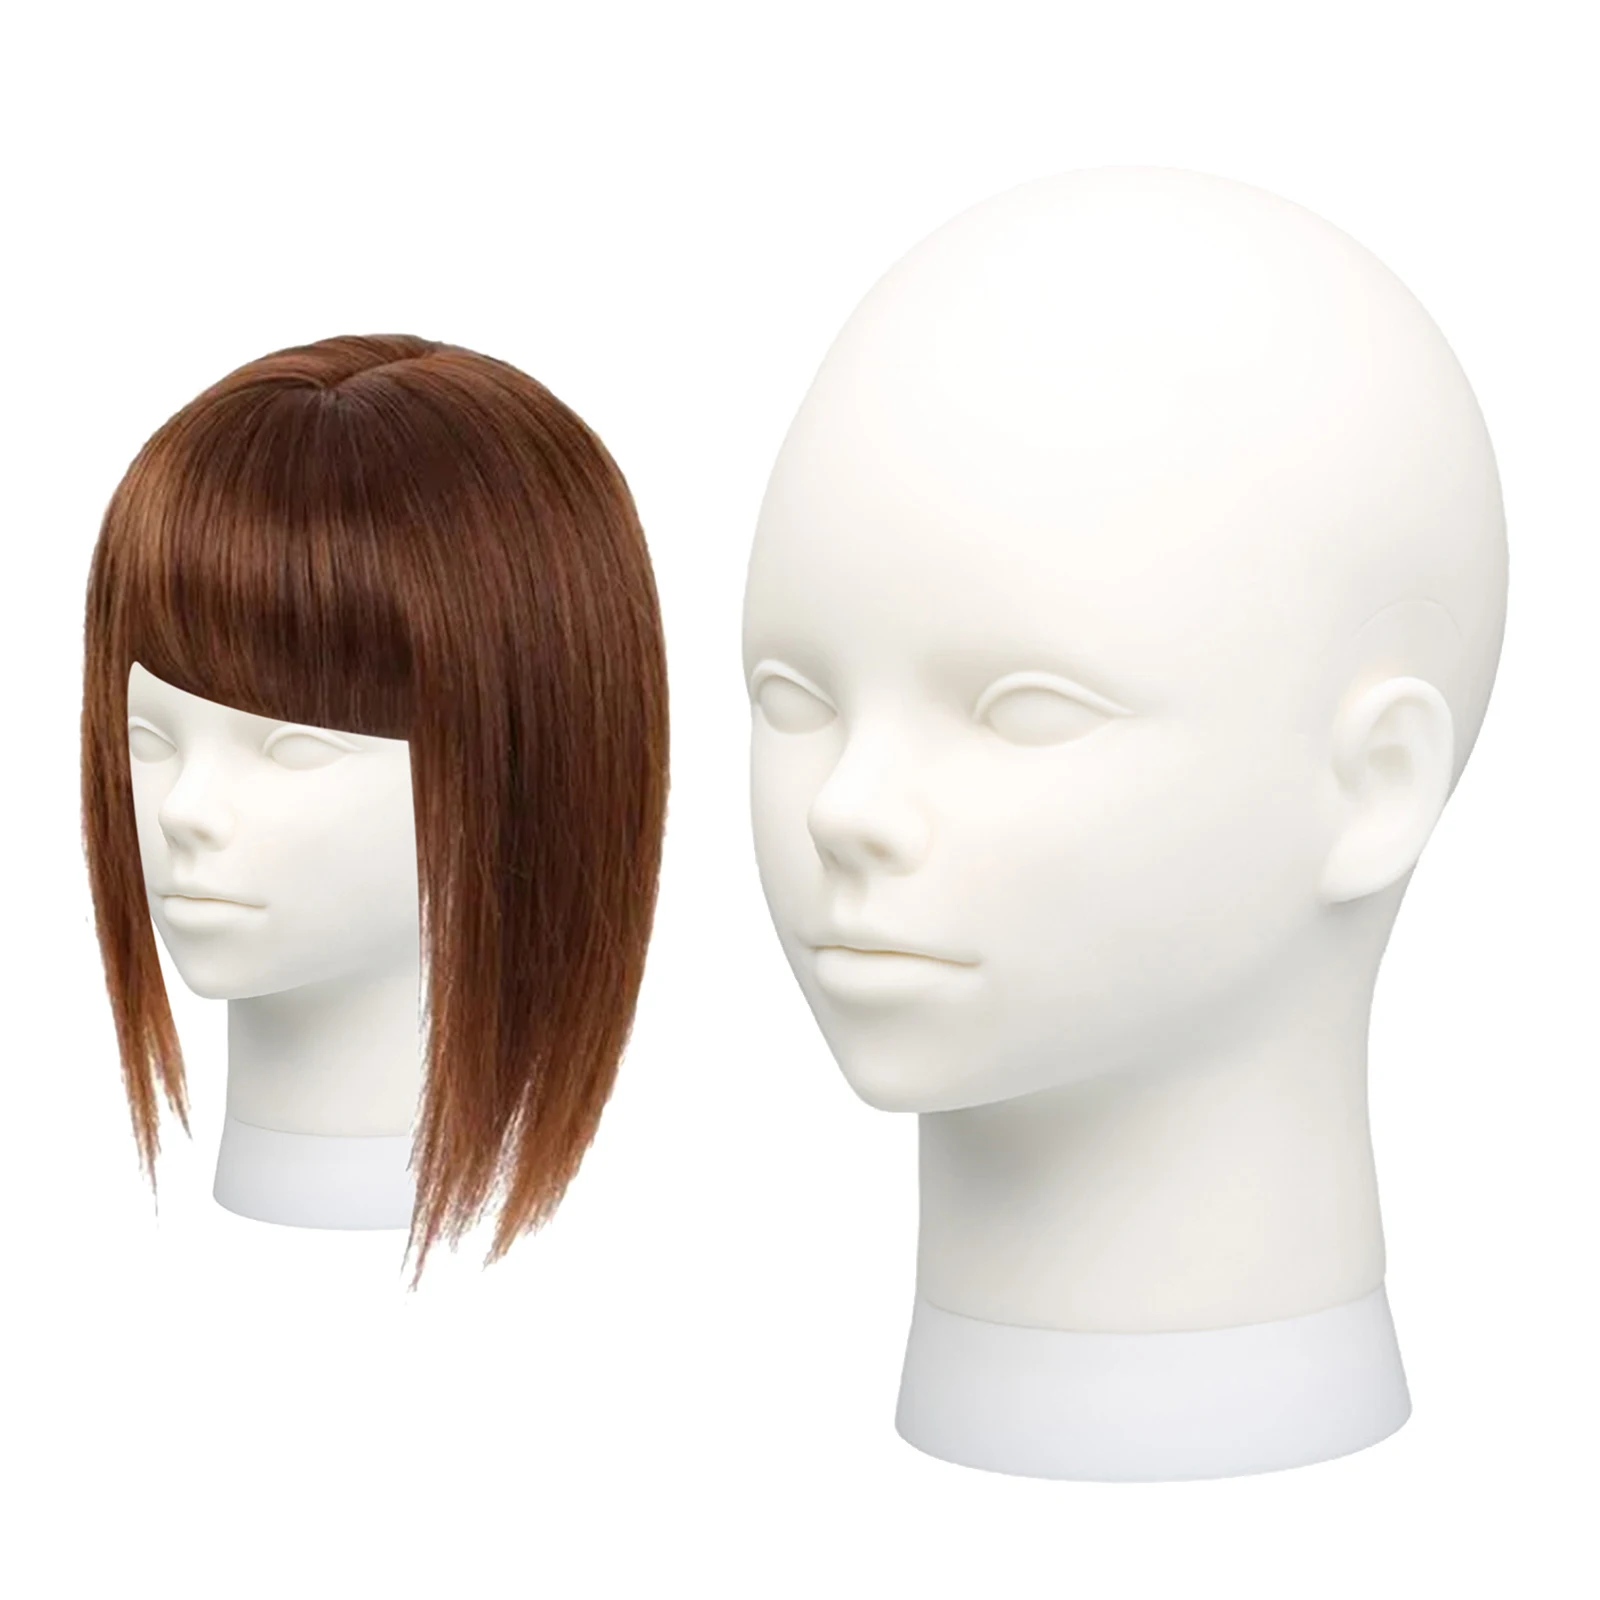 Bald Mannequin Head With Stand Cosmetology Practice Training Manikin Head Stand Tipod For Mannequin Wigs Home Salon Unisex